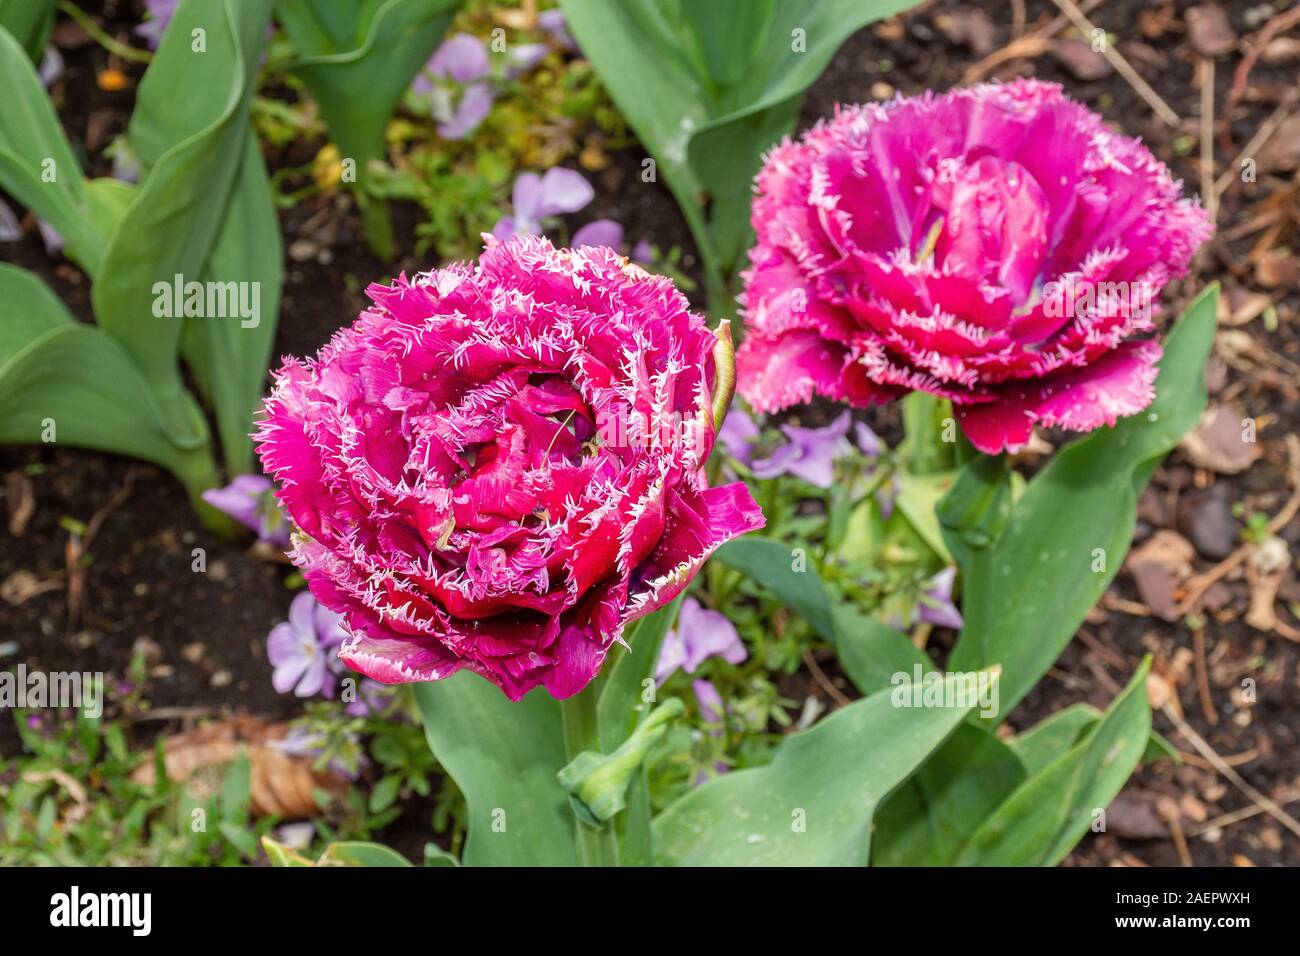 Firma Dehner High Resolution Stock Photography and Images - Alamy